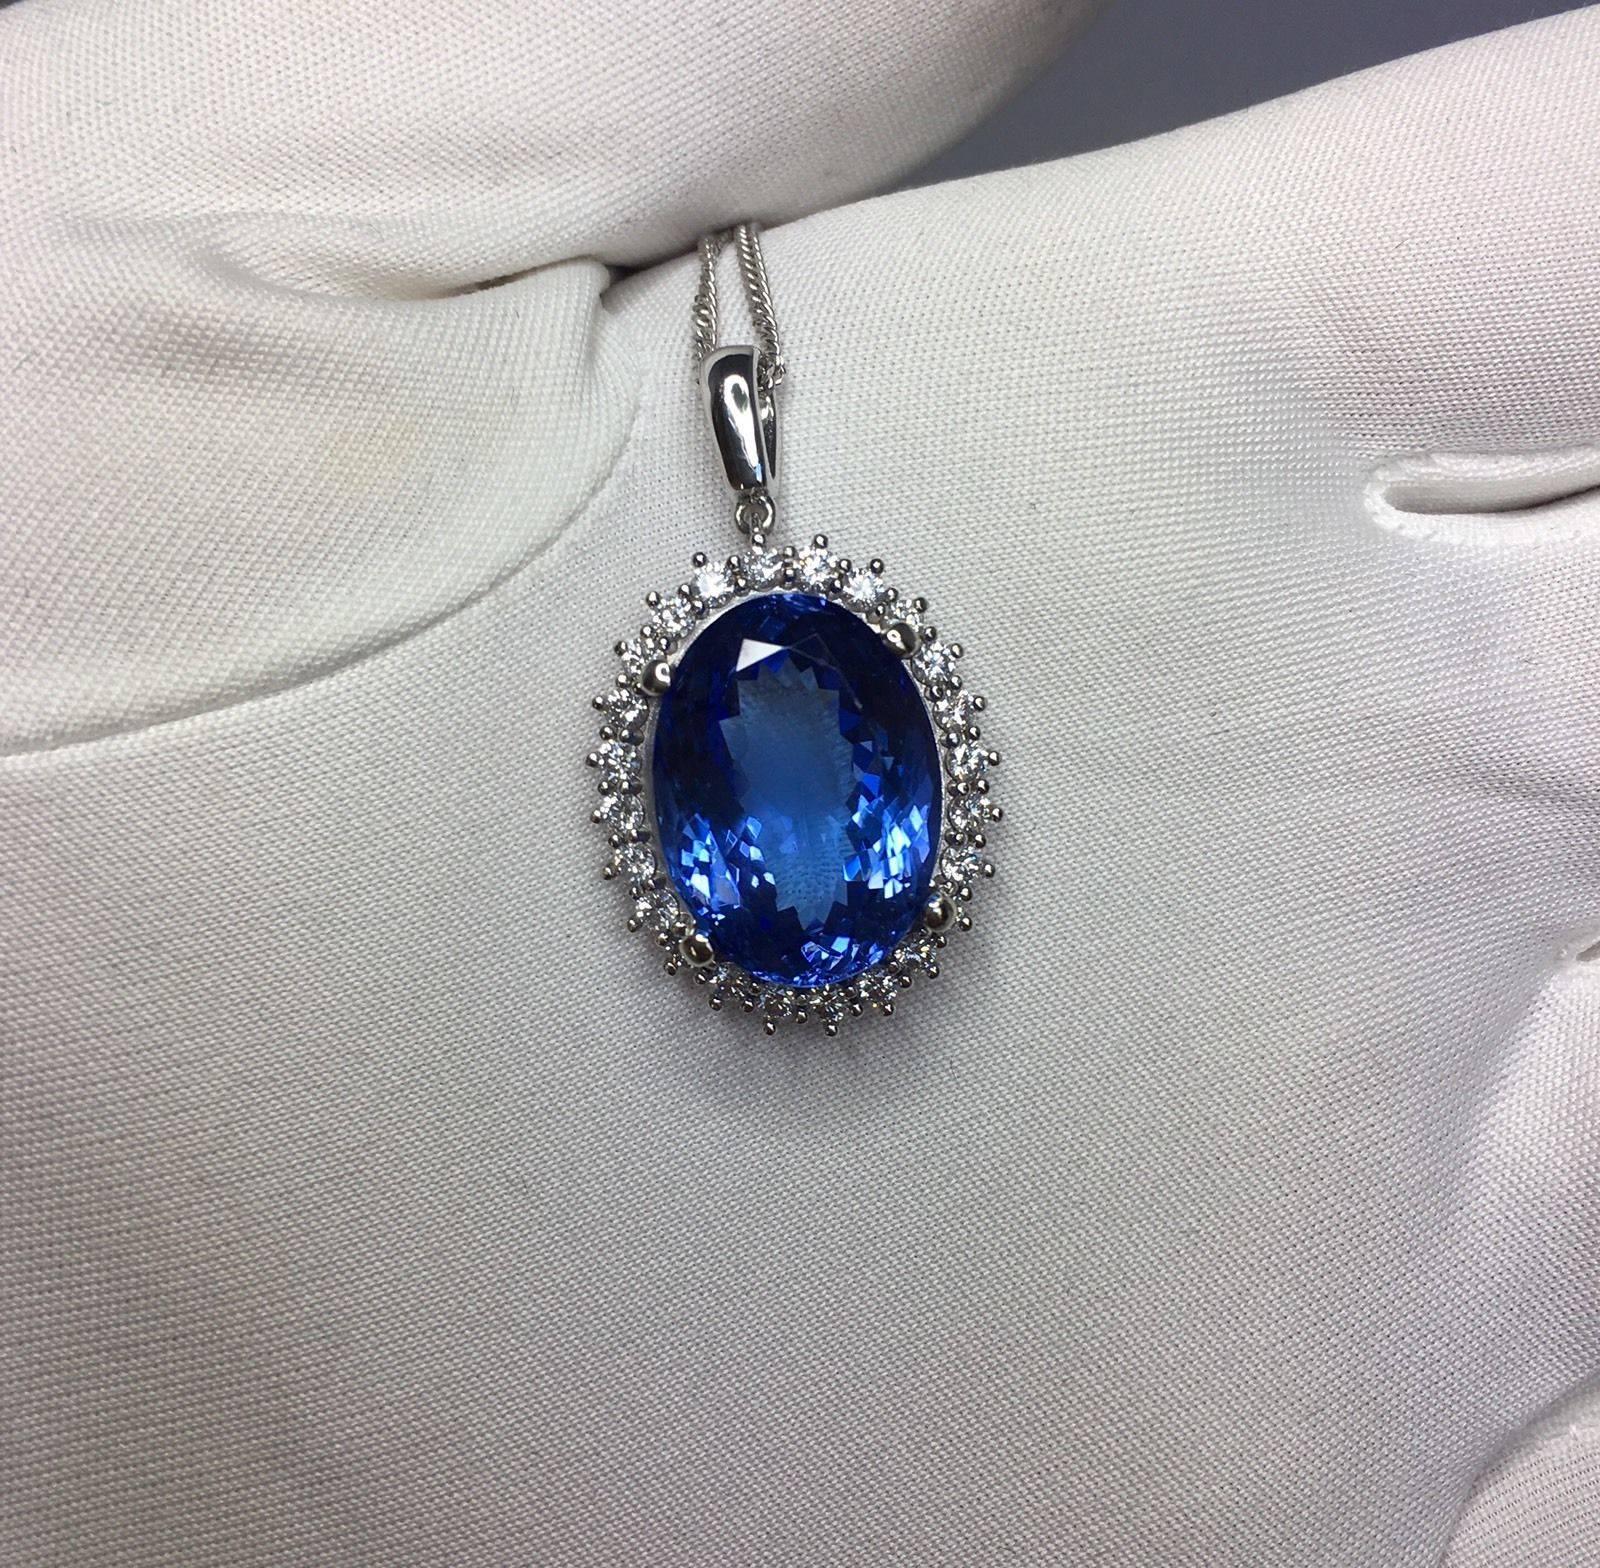 Stunning natural intense violet blue tanzanite and diamond pendant.


Huge centre tanzanite gem at 11.39ct

Excellent colour and clarity. Intense violet blue colour and practically flawless.  

Surrounded by 0.60ct of natural colourless diamonds.